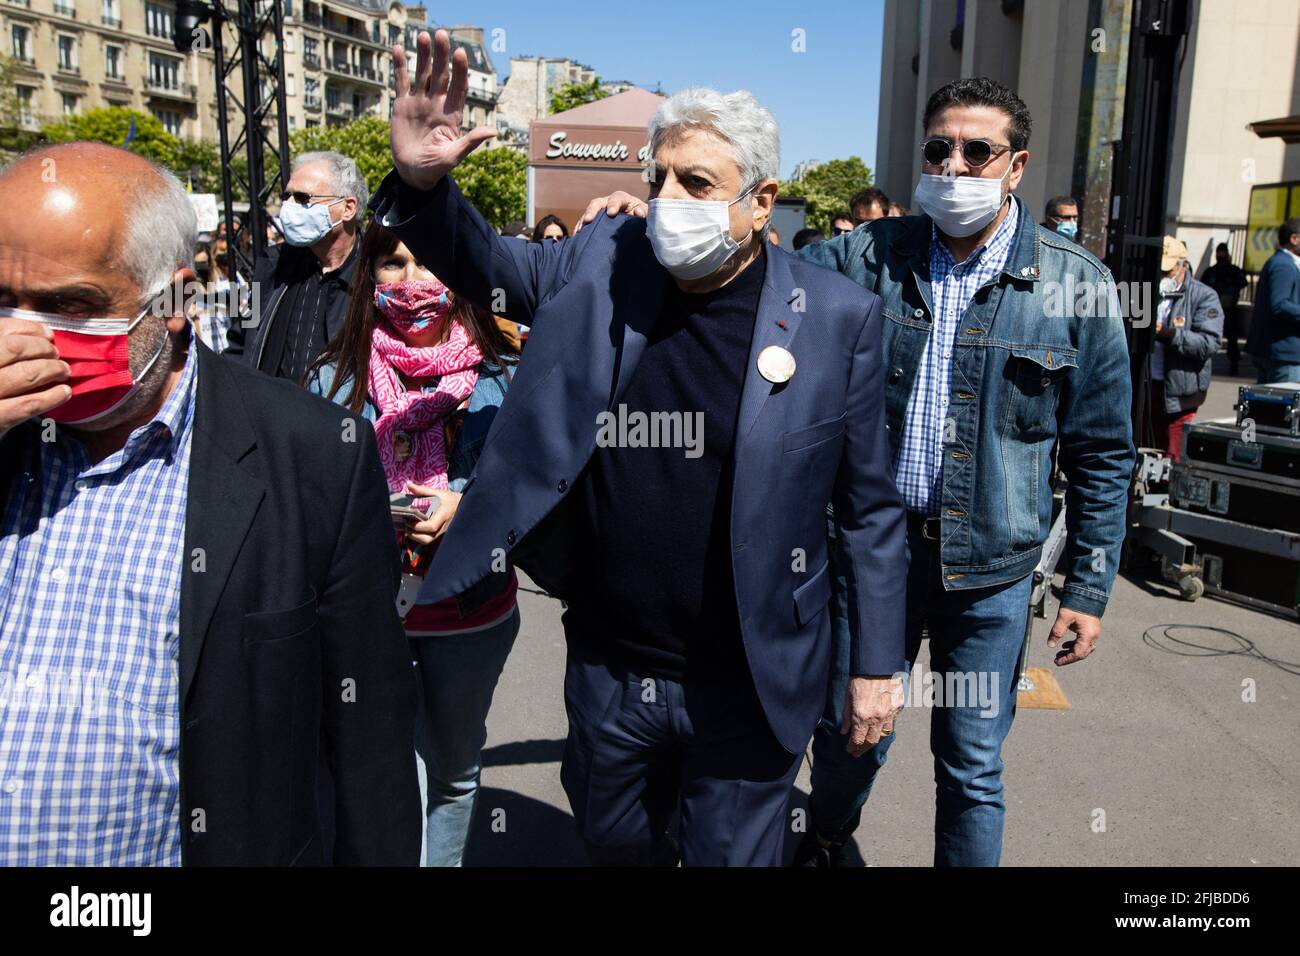 French singer Gaston Ghrenassia aka Enrico Macias (C) arrives as people gather to ask justice for late Sarah Halimi on Trocadero plaza in Paris on April 25, 2021. Halimi, a 65-year-old Orthodox Jewish woman, died in 2017 after being pushed out of the window of her Paris flat by neighbour Traore, 27, who shouted "Allahu Akbar" ("God is great" in Arabic). Traore, a heavy cannabis smoker, has been in psychiatric care since Halimi's death and he remains there after the ruling. Photo by Raphael Lafargue/ABACAPRESS.COM Stock Photo